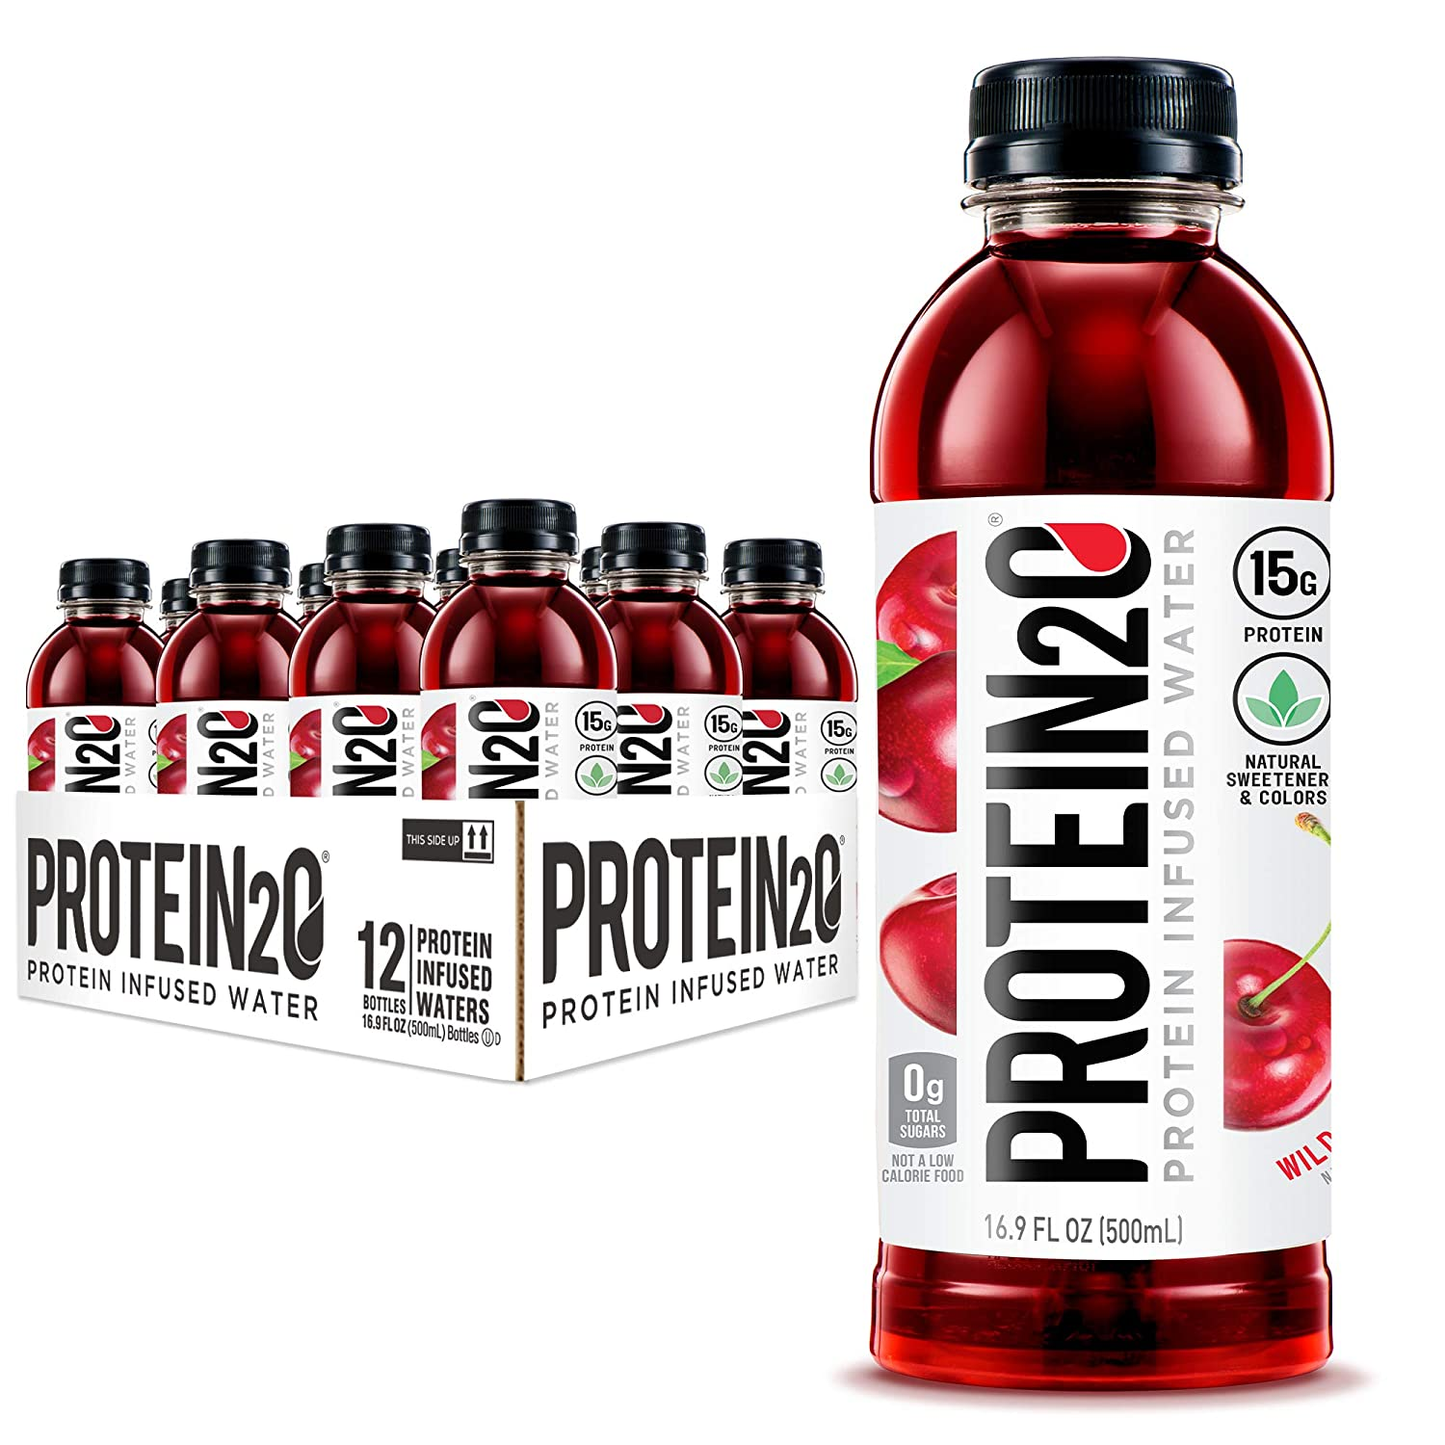 Protein2O 15G Whey Protein Infused Water, Peach Mango, 16.9 Oz Bottle (Pack of 12)